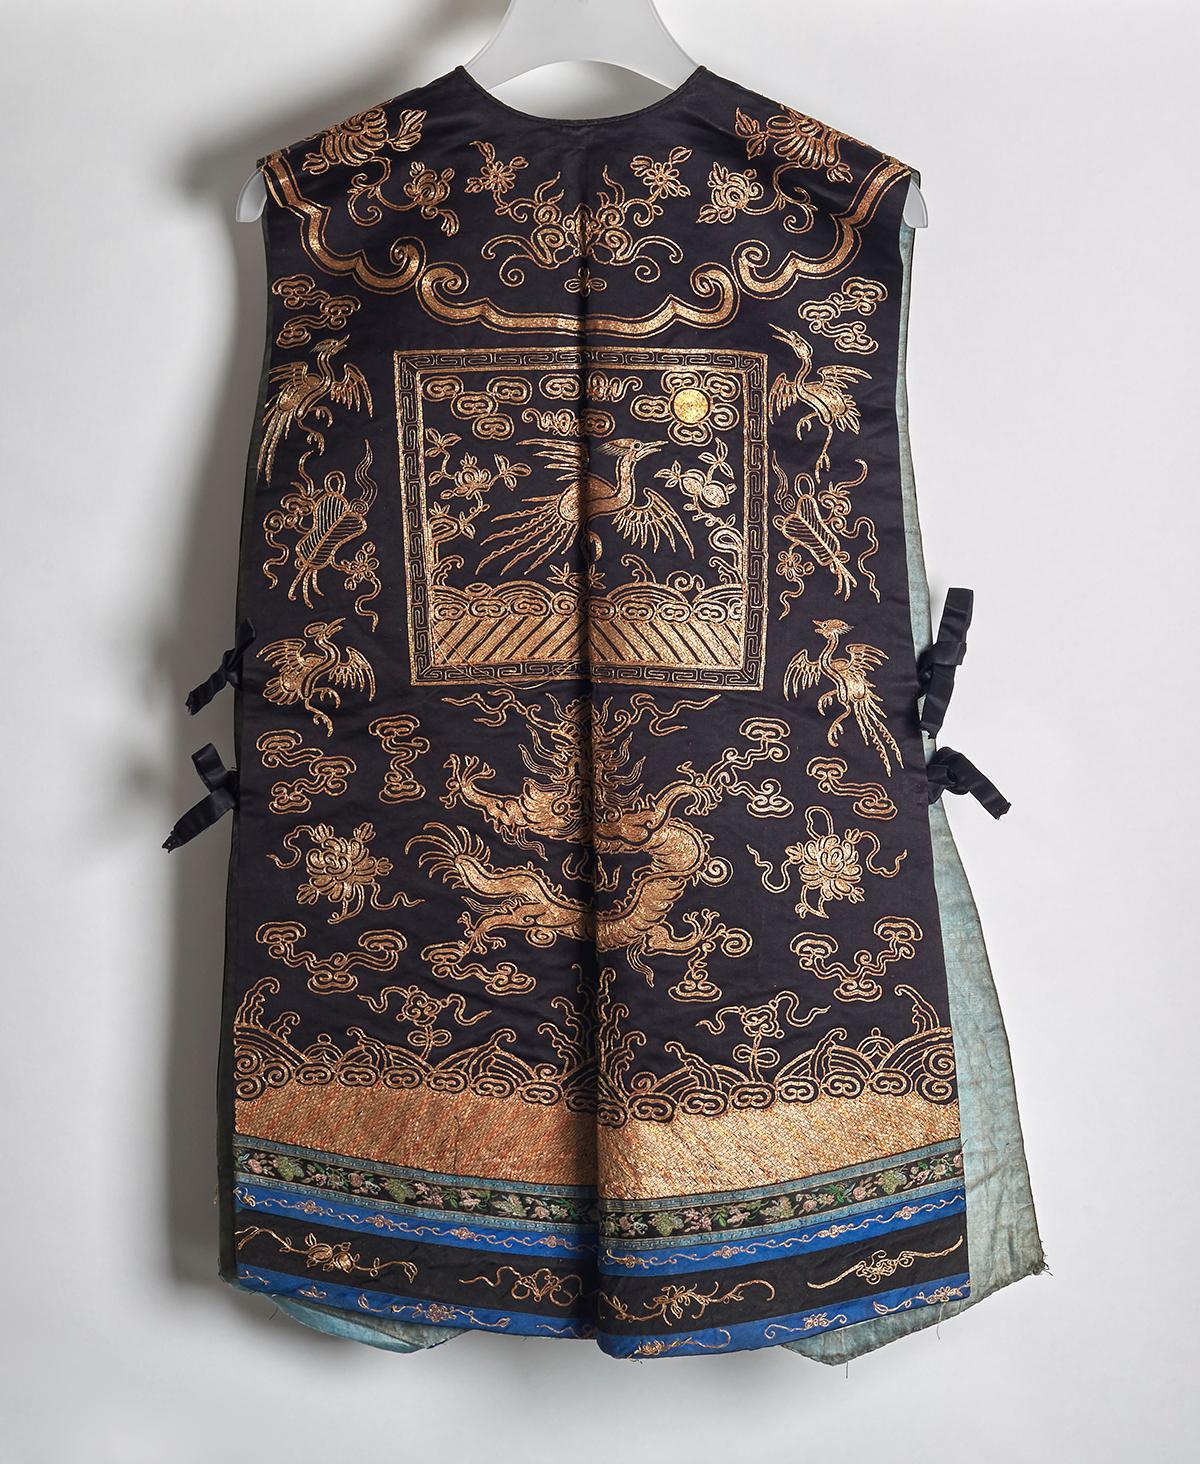 A very fine antique Chinese xiape ladies court waistcoat embroidered with silver thread with scrolling dragons amidst clouds above waves and with a pheasant 5th rank badge embroidered to the front and back. The black satin waistcoat with ties and